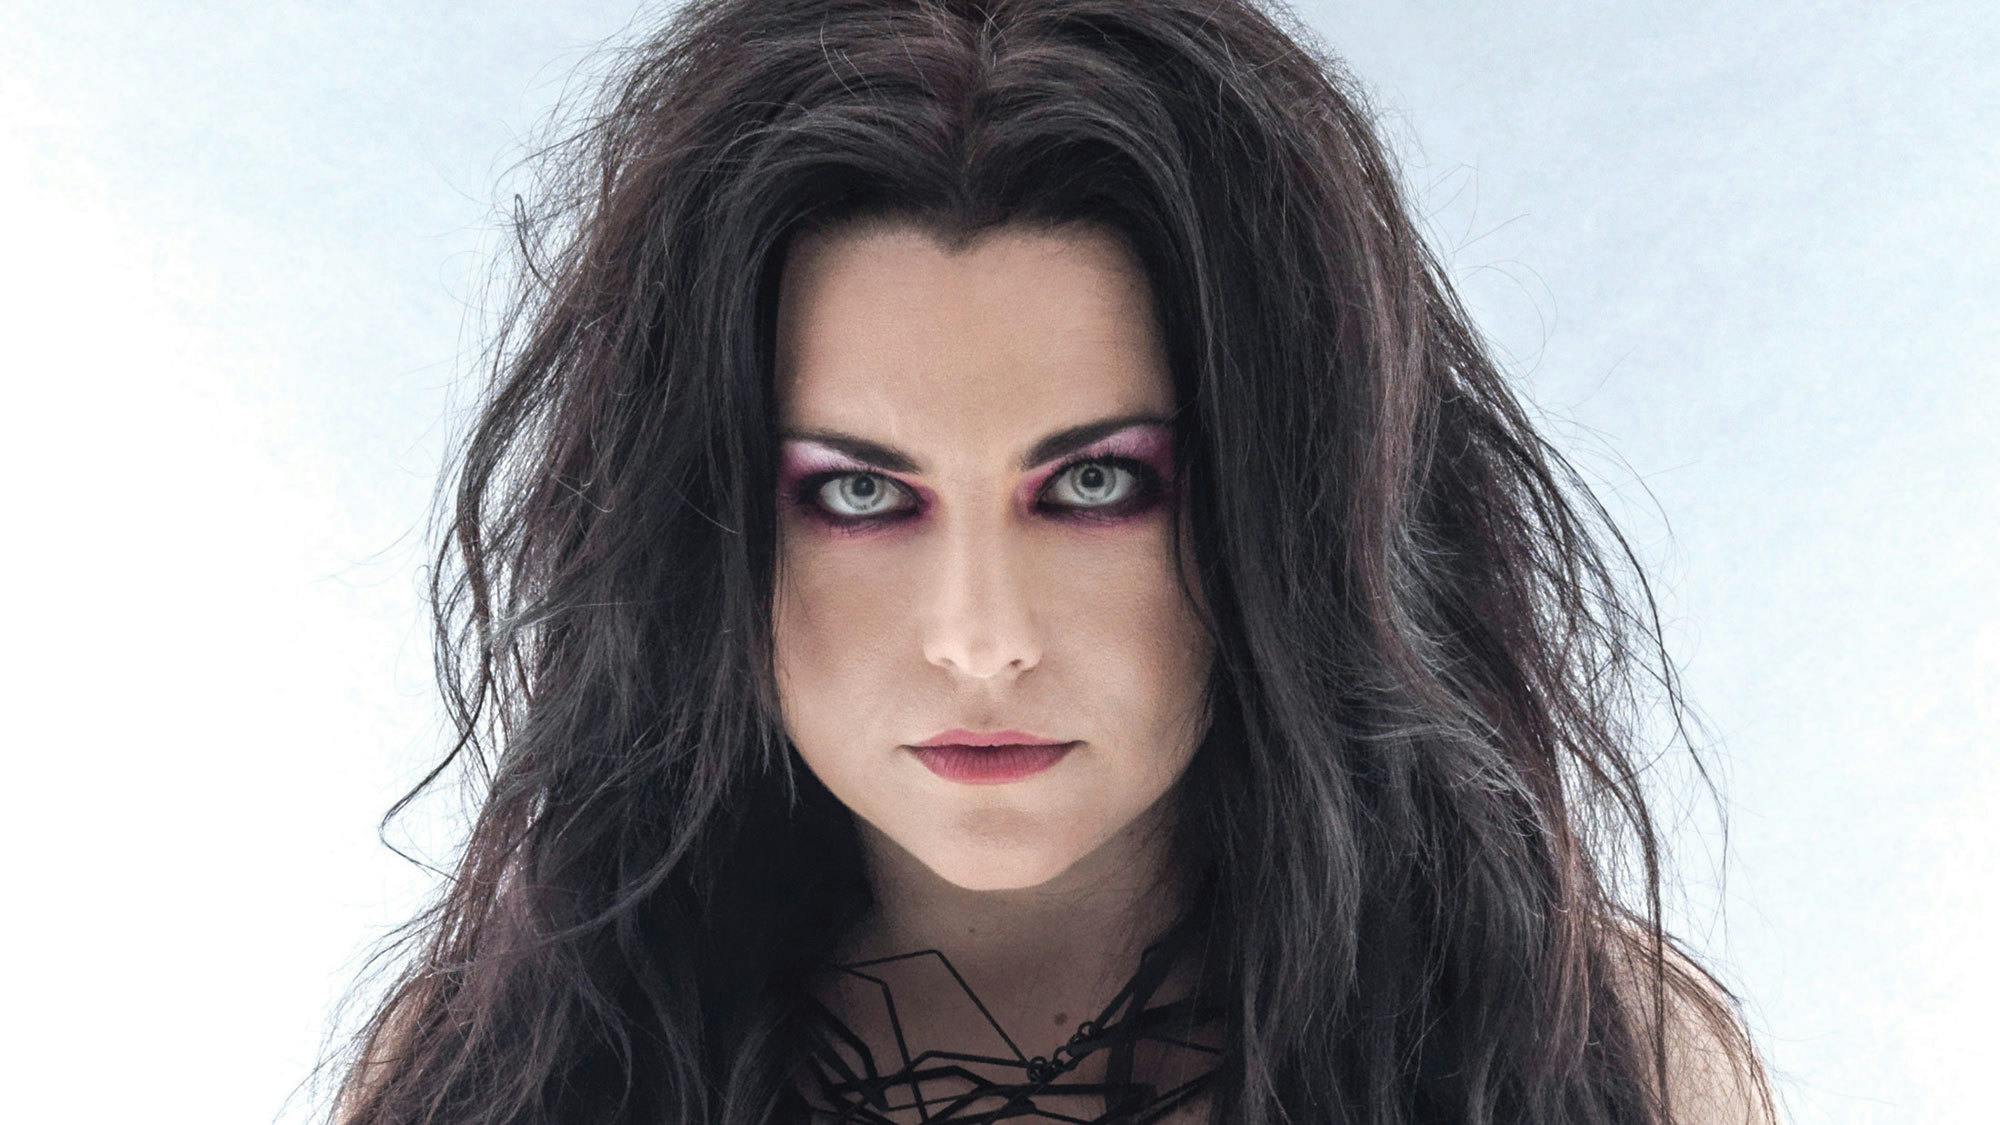 Amy Lee: New Evanescence Songs Are “Going To A Place That’s Even More Raw”